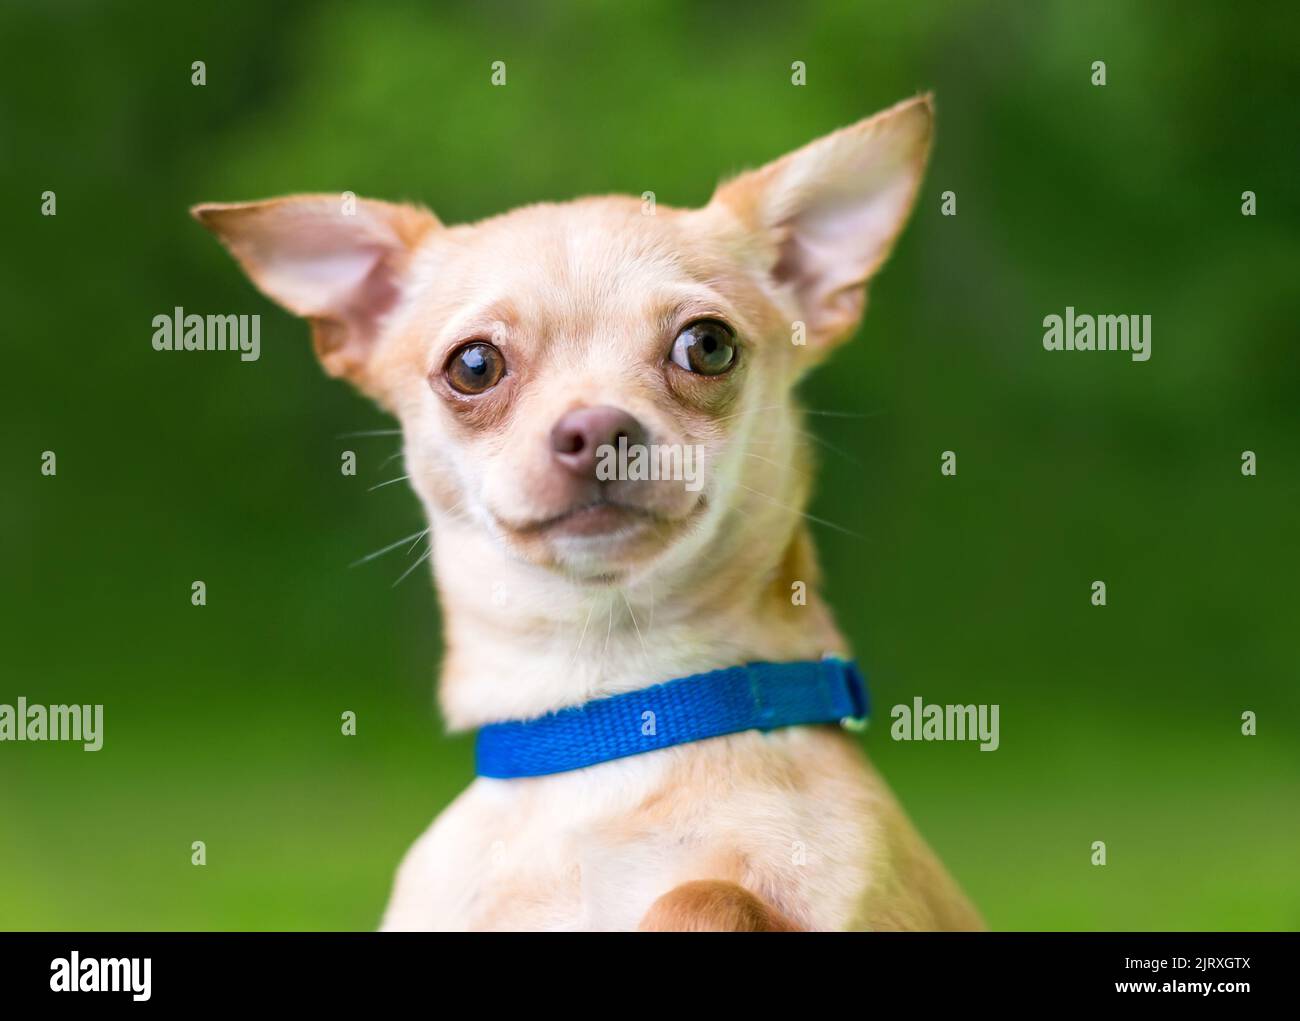 A cute fawn colored Chihuahua dog outdoors Stock Photo